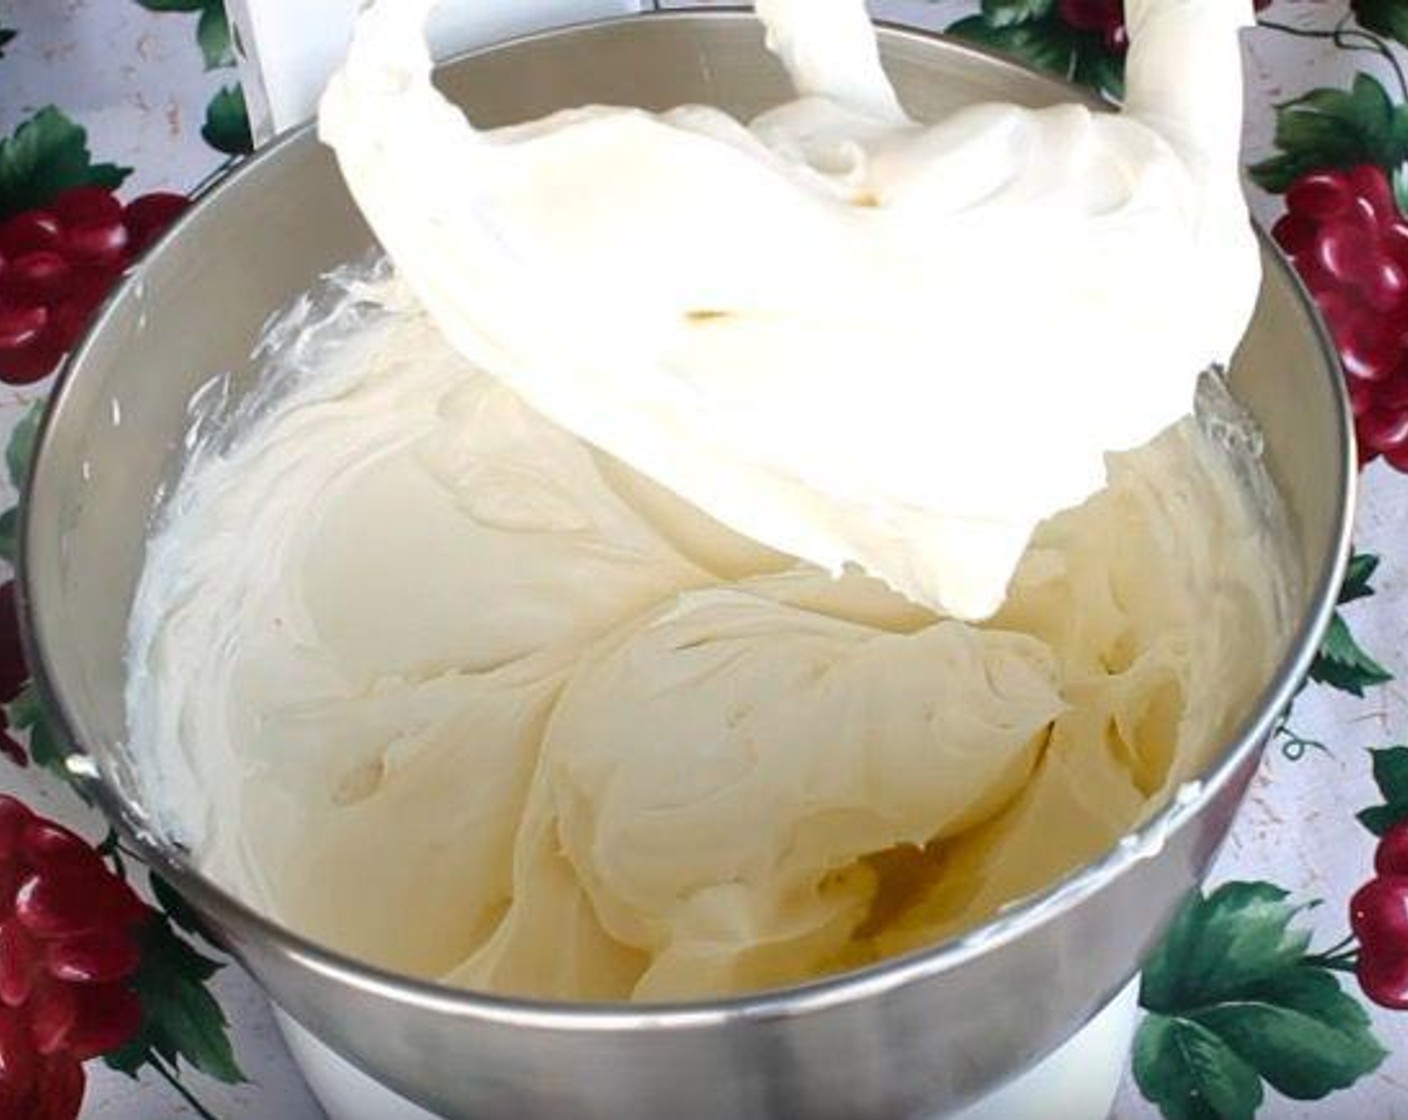 step 3 In the bowl of a stand mixer, add Cream Cheese (4 cups). Mix on medium speed for 4 minutes.